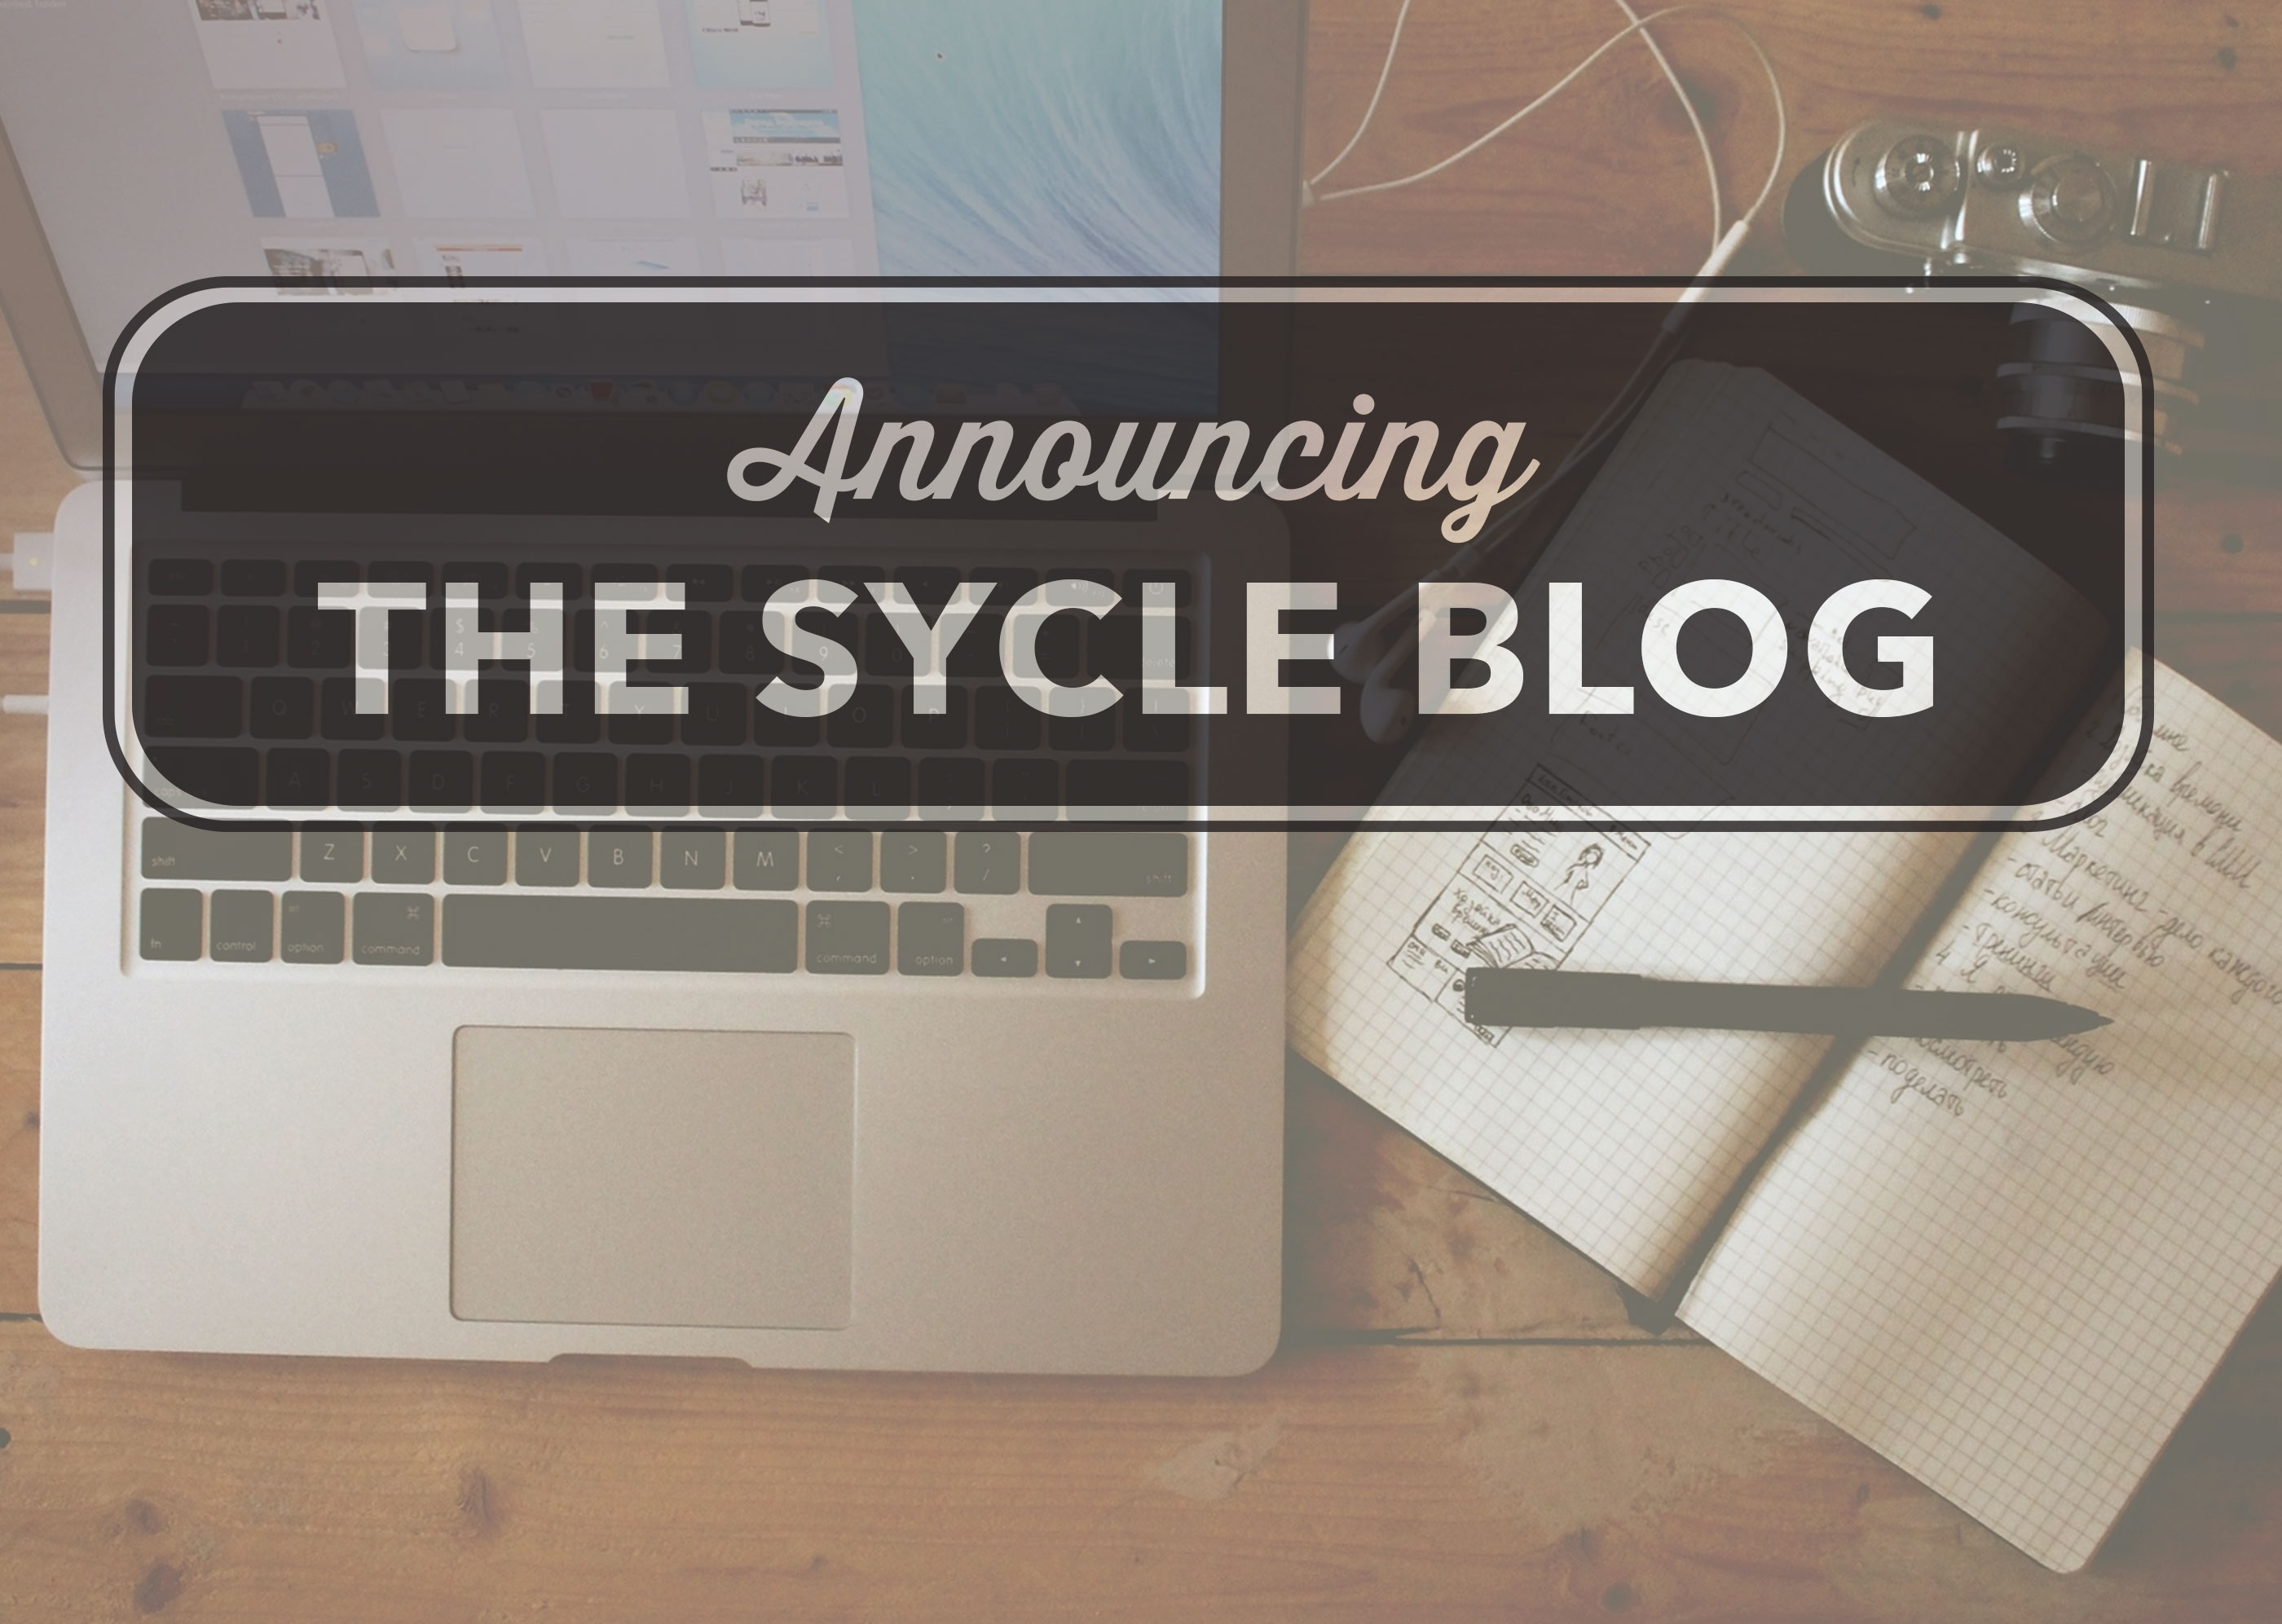 the Sycle blog ad